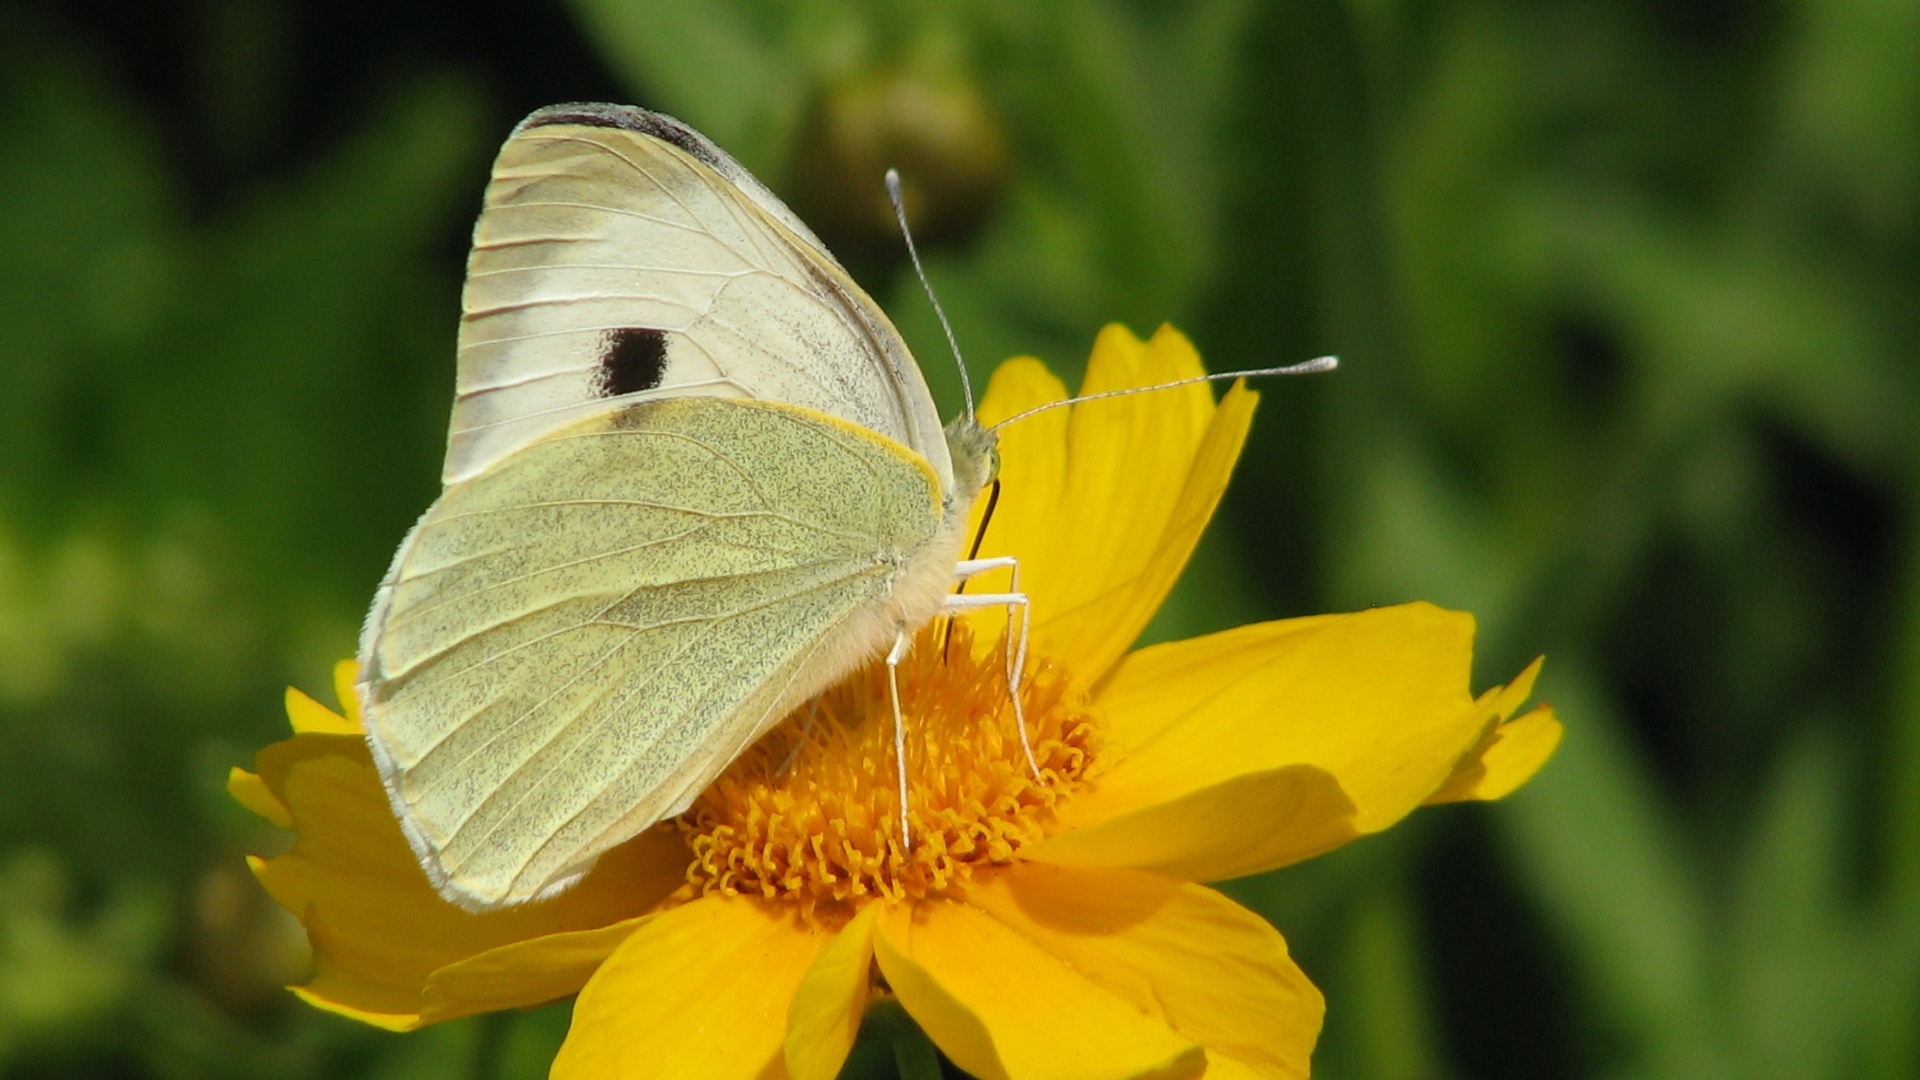 wallpaper YELLOW BUTTERFLY | White Butterfly On Yellow Flower ...